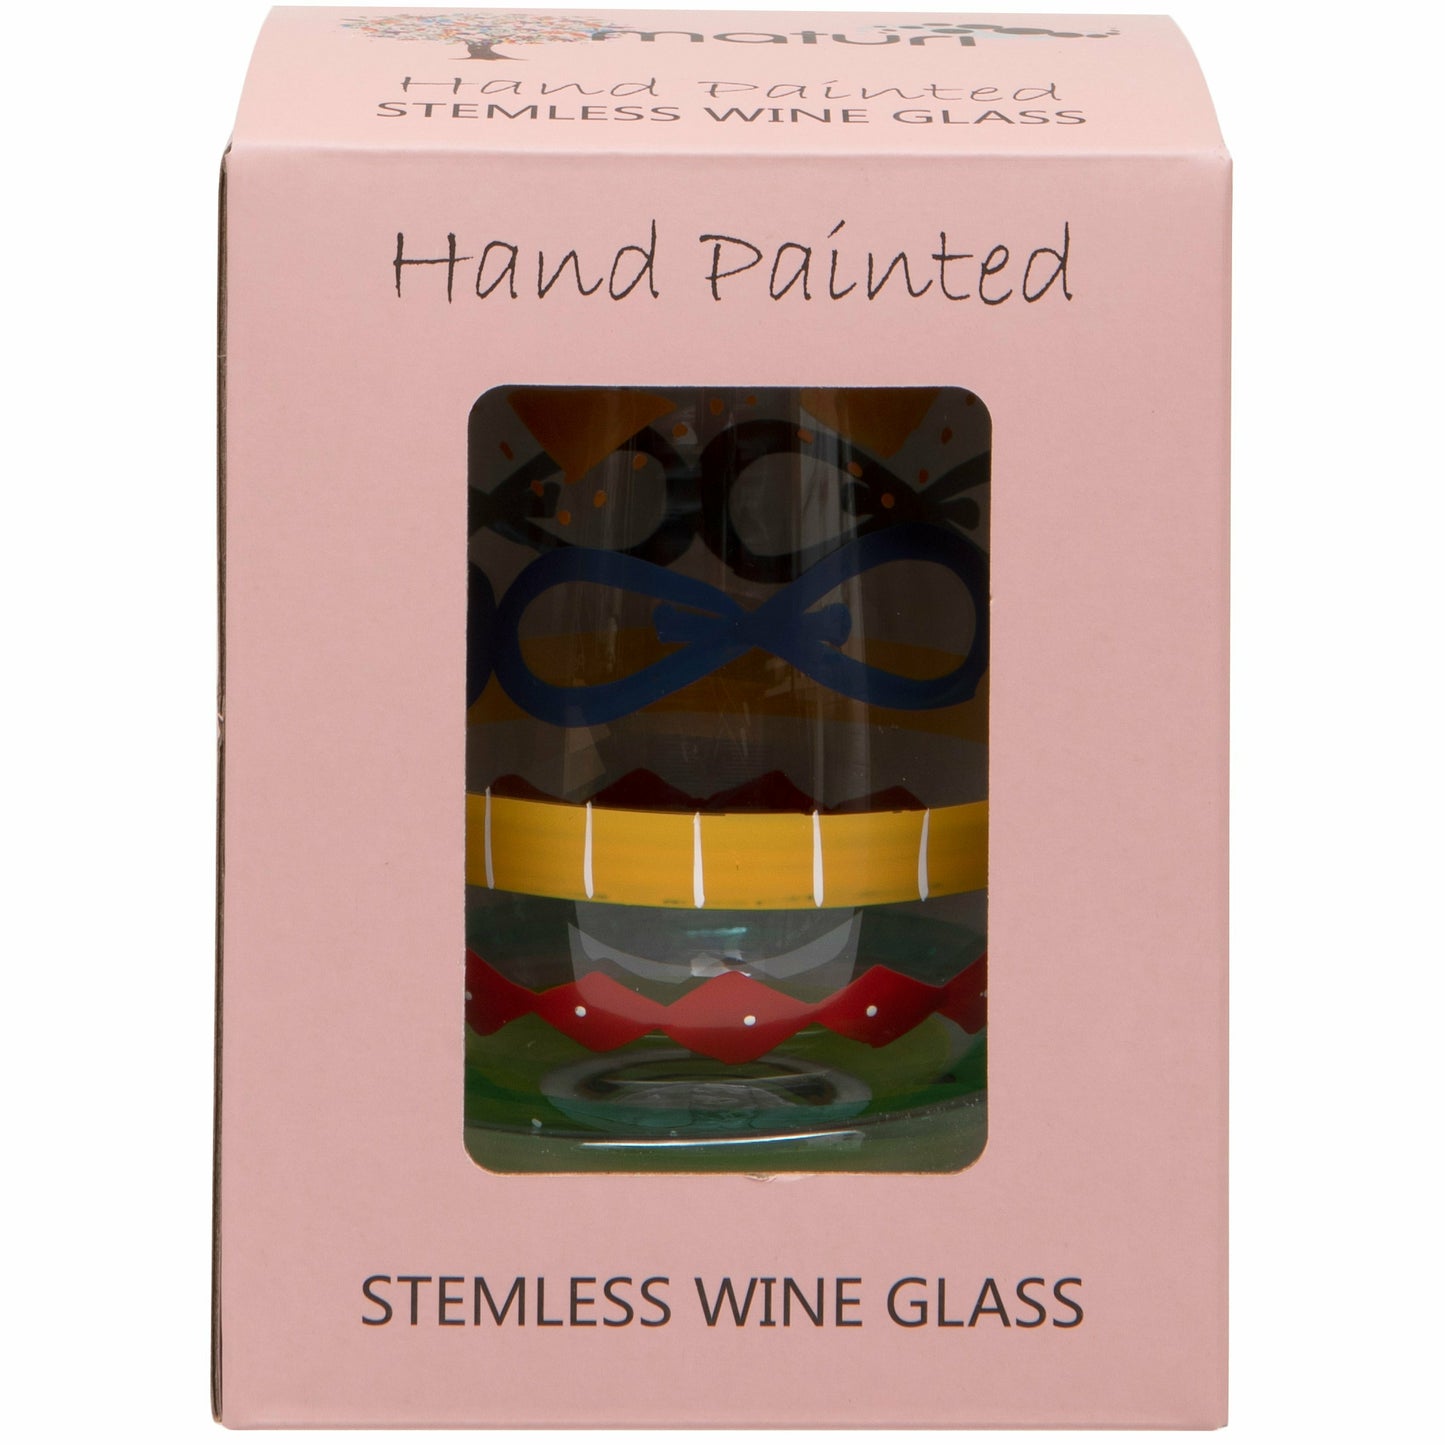 Hand Painted Multi Print Stemless Wine Glass